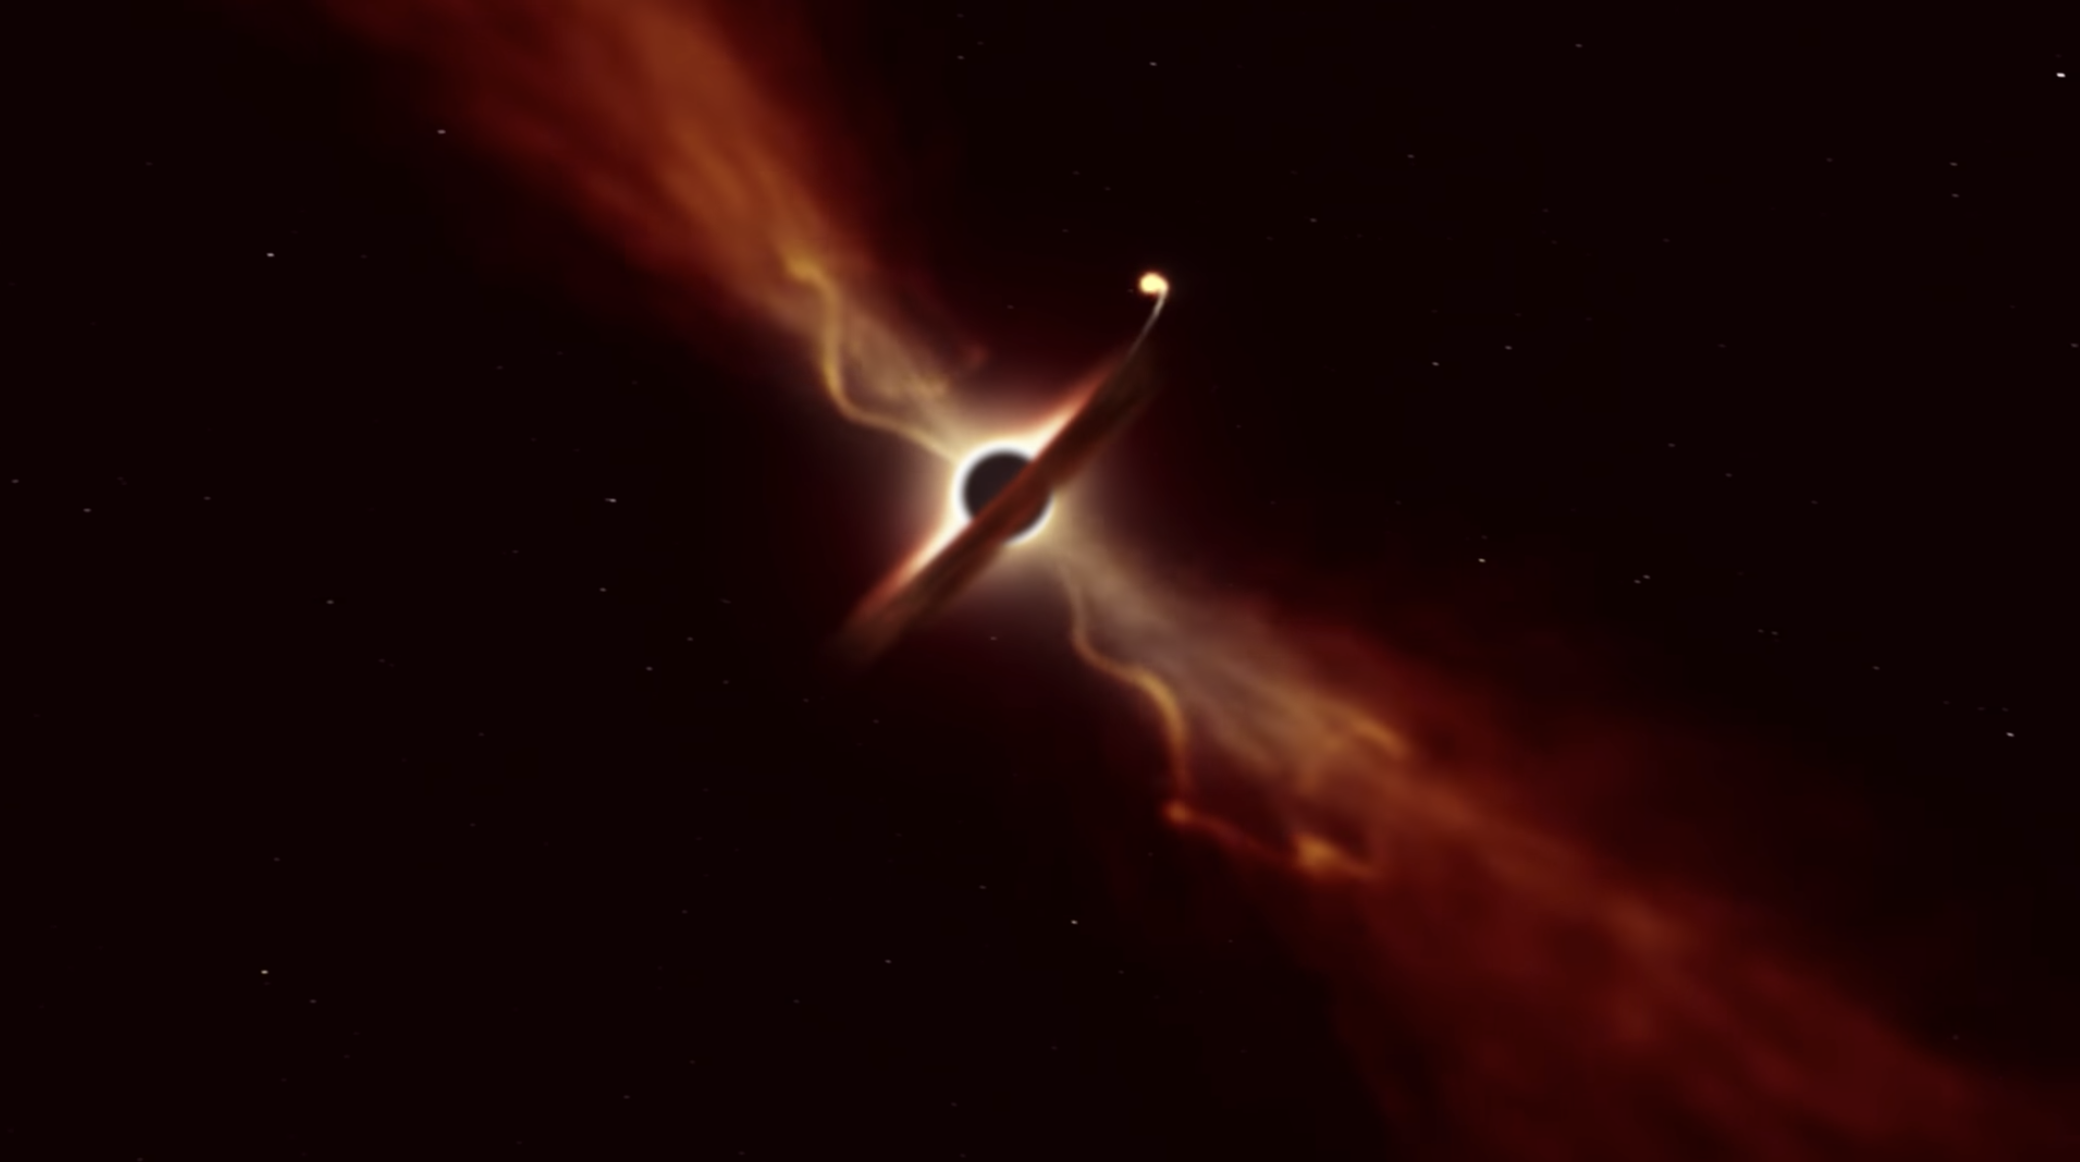 Spaghettification: Scientists Watch a Black Hole Eat a Star